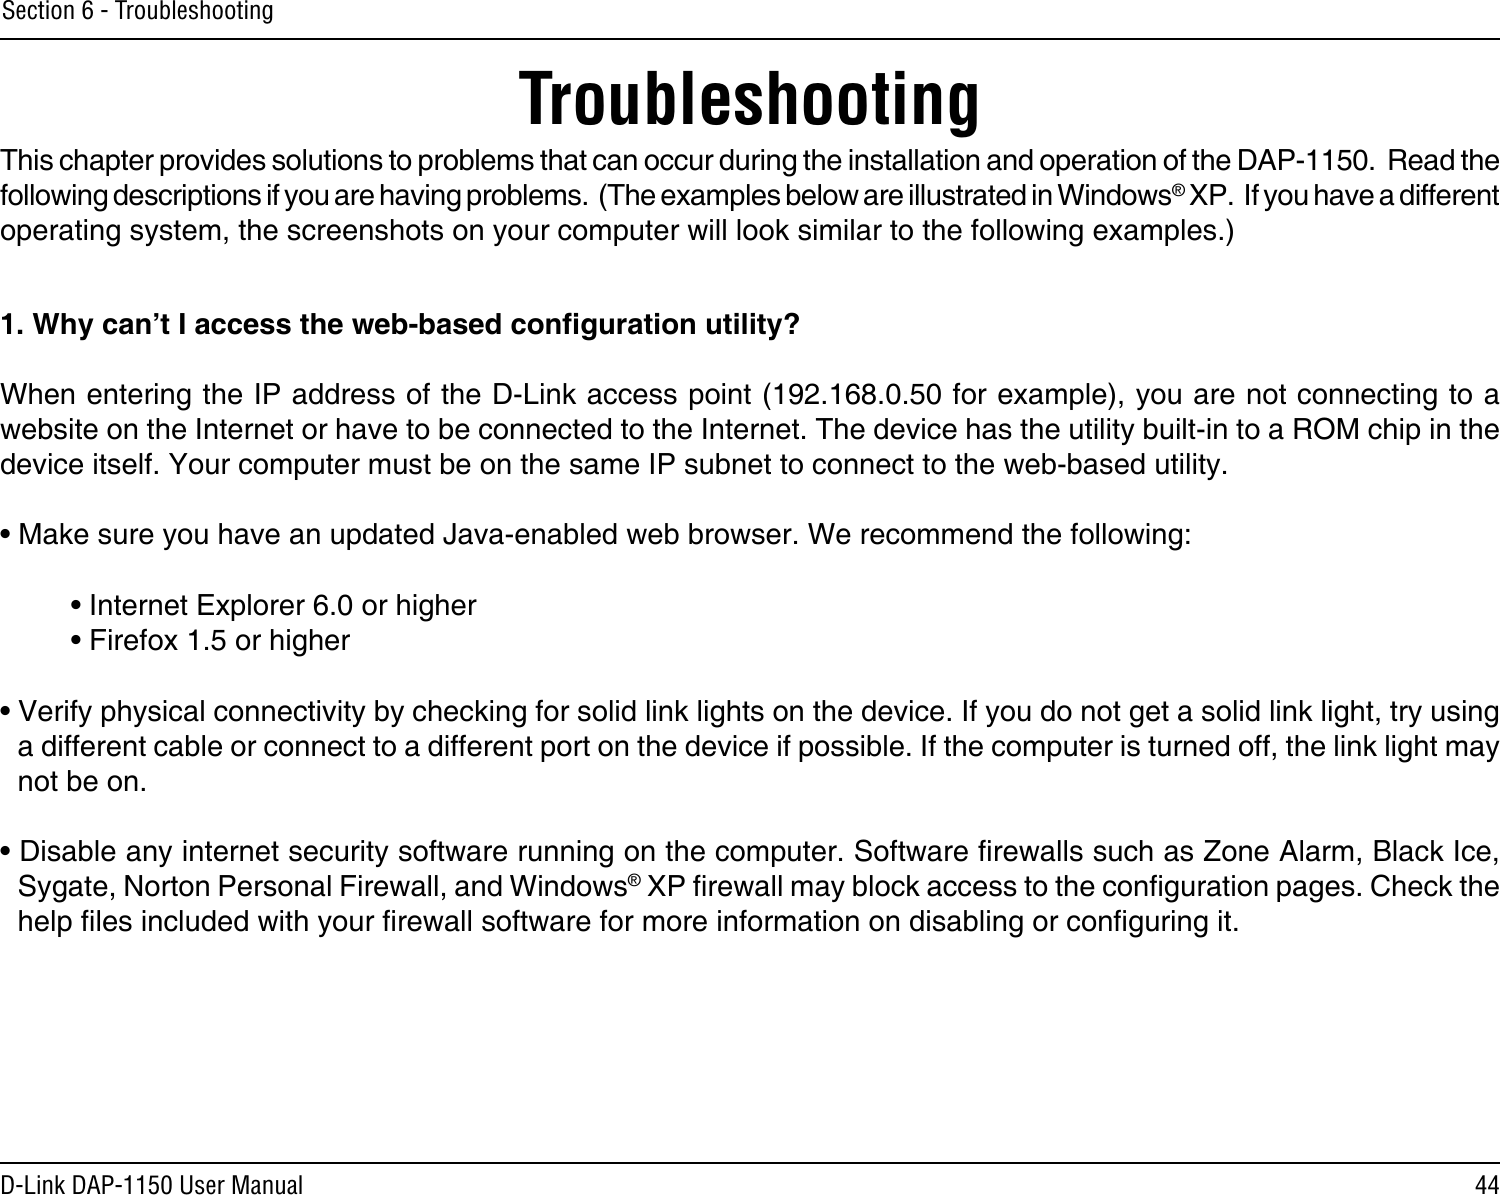 44D-Link DAP-1150 User ManualSection 6 - TroubleshootingTroubleshootingThis chapter provides solutions to problems that can occur during the installation and operation of the DAP-1150.  Read the following descriptions if you are having problems.  (The examples below are illustrated in Windows® XP.  If you have a different operating system, the screenshots on your computer will look similar to the following examples.)1. Why can’t I access the web-based conguration utility?When entering the IP address of the D-Link access point (192.168.0.50 for example), you are not connecting to a website on the Internet or have to be connected to the Internet. The device has the utility built-in to a ROM chip in the device itself. Your computer must be on the same IP subnet to connect to the web-based utility. • Make sure you have an updated Java-enabled web browser. We recommend the following: • Internet Explorer 6.0 or higher  • Firefox 1.5 or higher • Verify physical connectivity by checking for solid link lights on the device. If you do not get a solid link light, try using a different cable or connect to a different port on the device if possible. If the computer is turned off, the link light may not be on.• Disable any internet security software running on the computer. Software rewalls such as Zone Alarm, Black Ice, Sygate, Norton Personal Firewall, and Windows® XP rewall may block access to the conguration pages. Check the help les included with your rewall software for more information on disabling or conguring it.